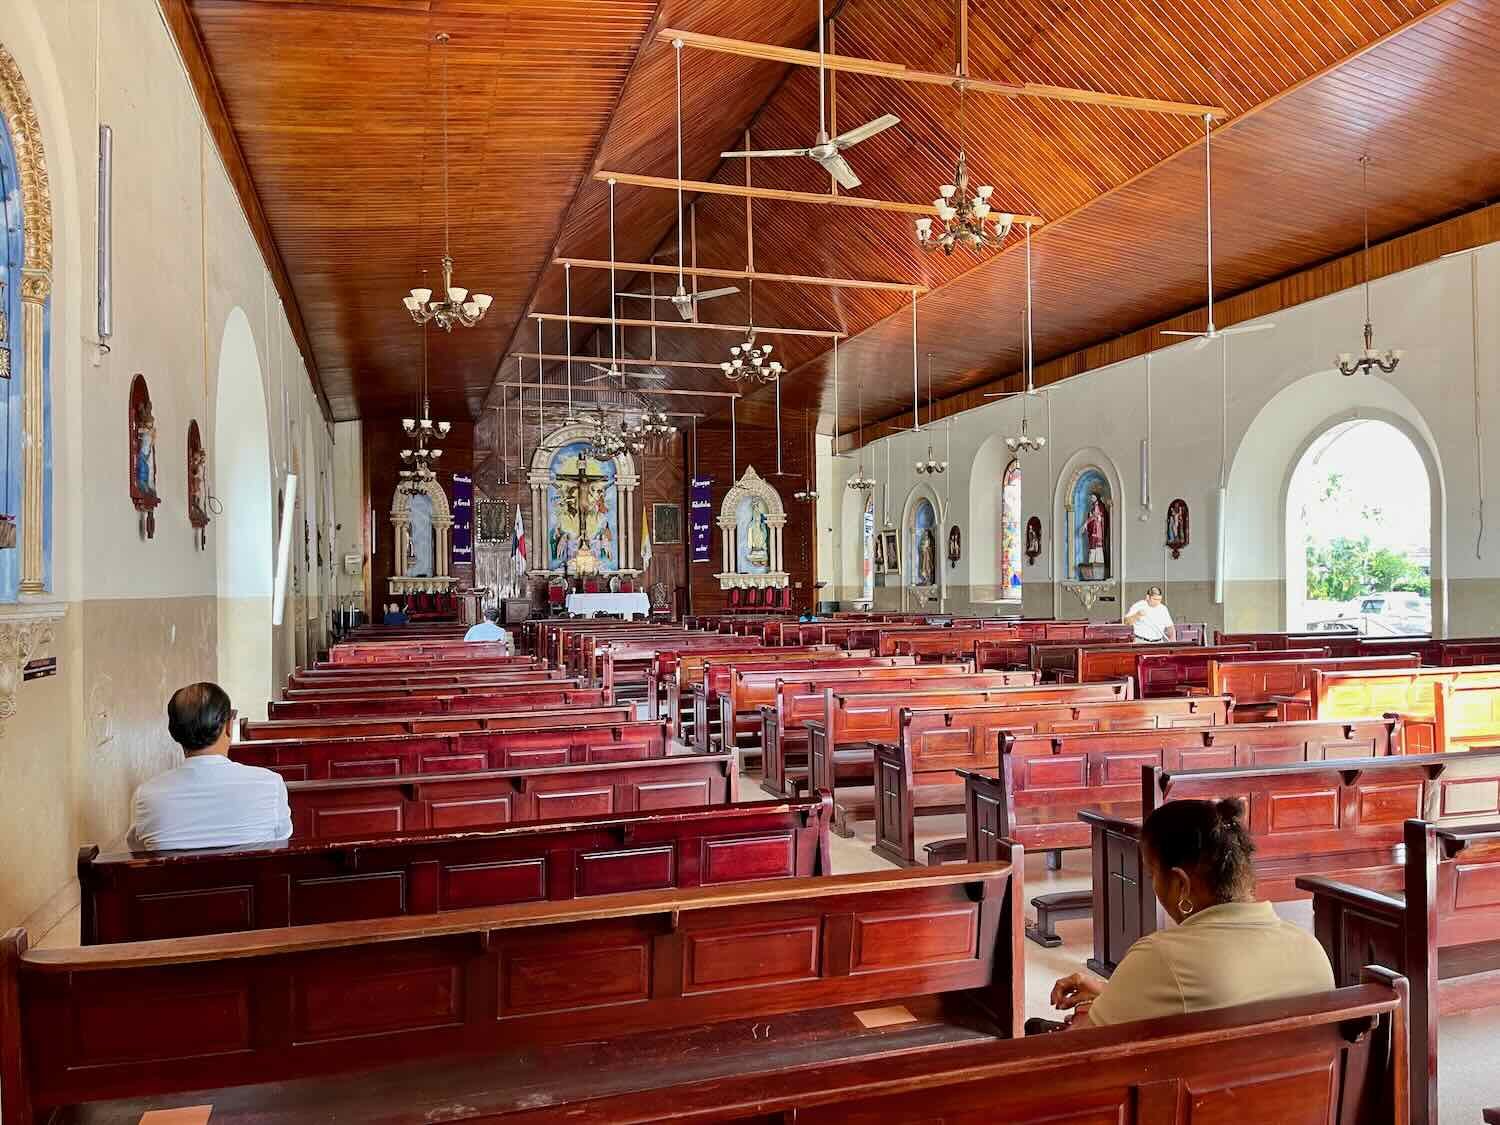 The simple interior of the cathedral had an impressive wooden ceiling and mahogany altar